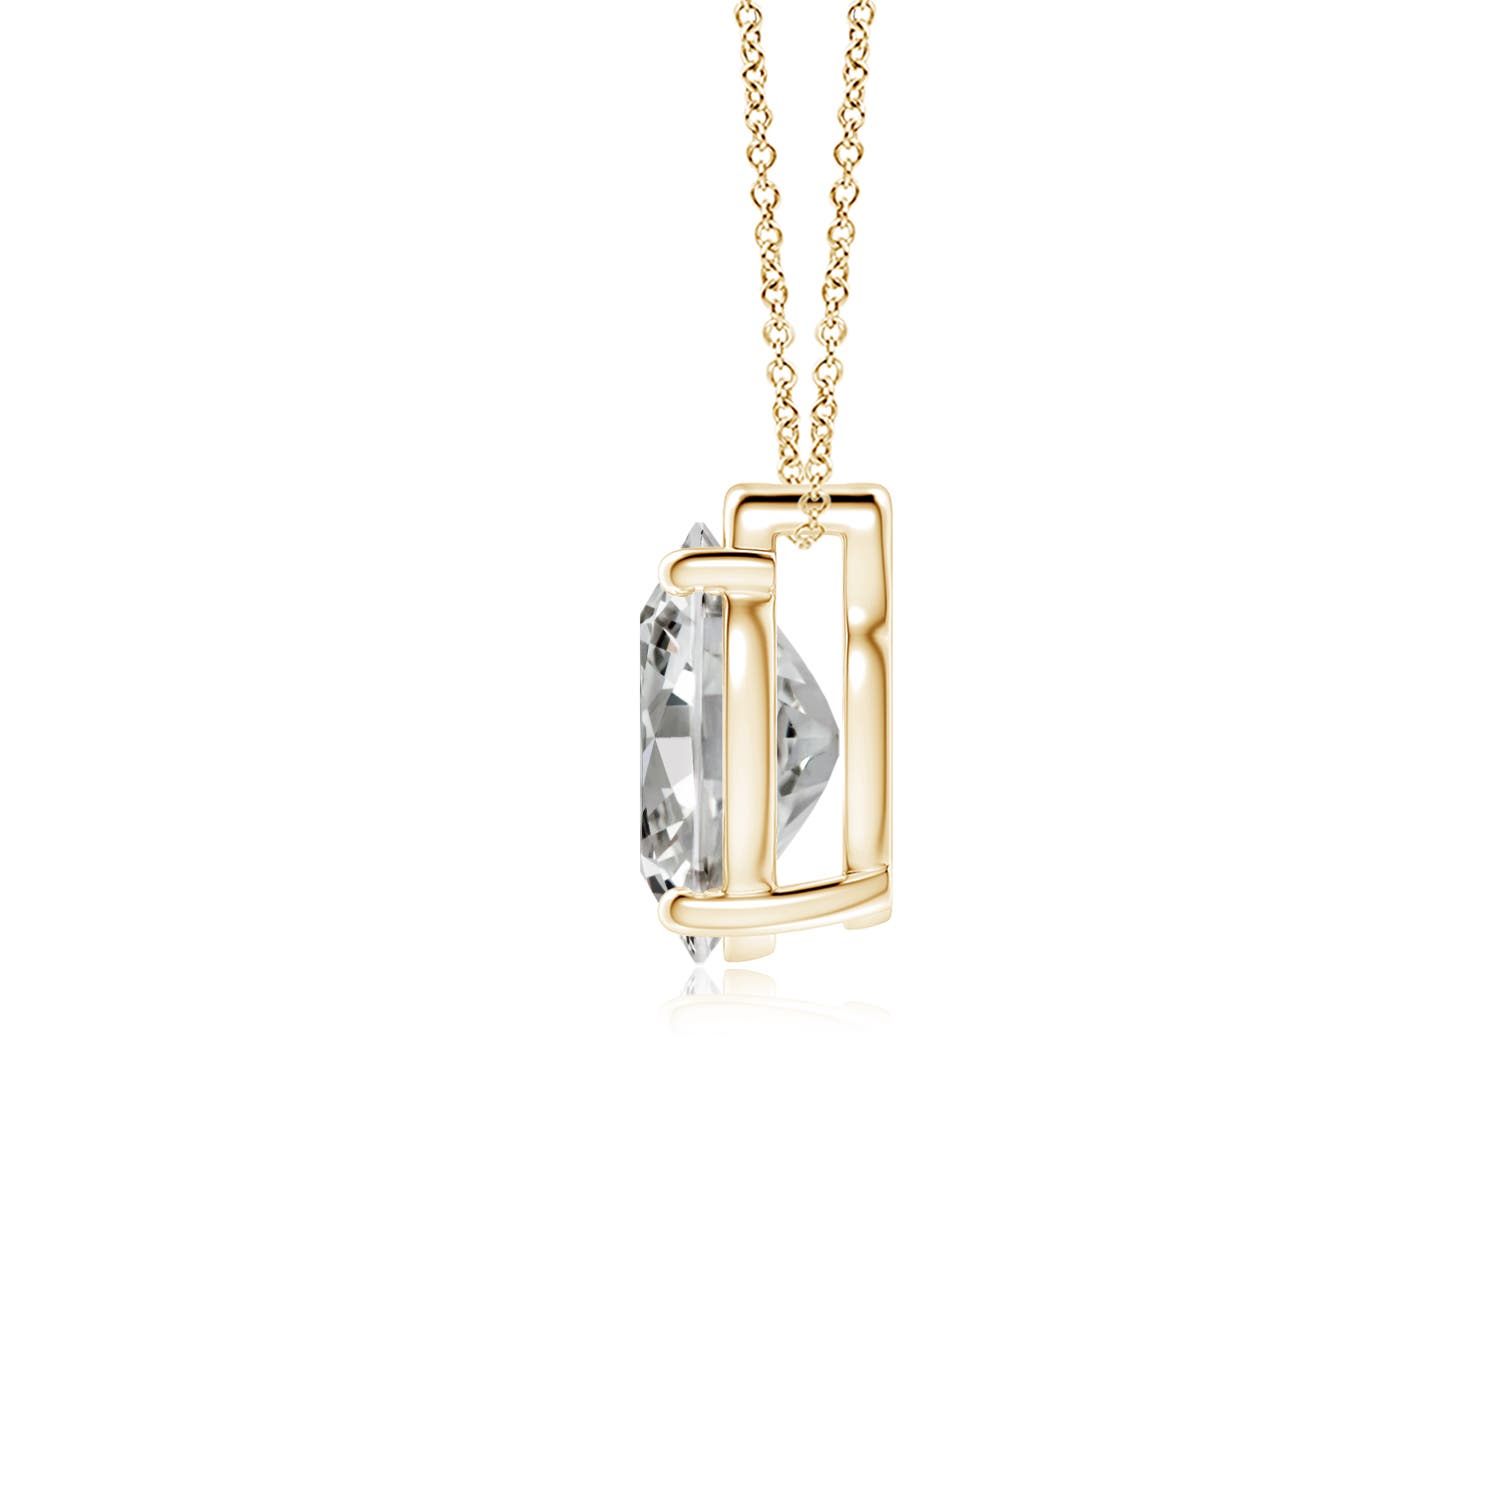 K, I3 / 1.76 CT / 14 KT Yellow Gold